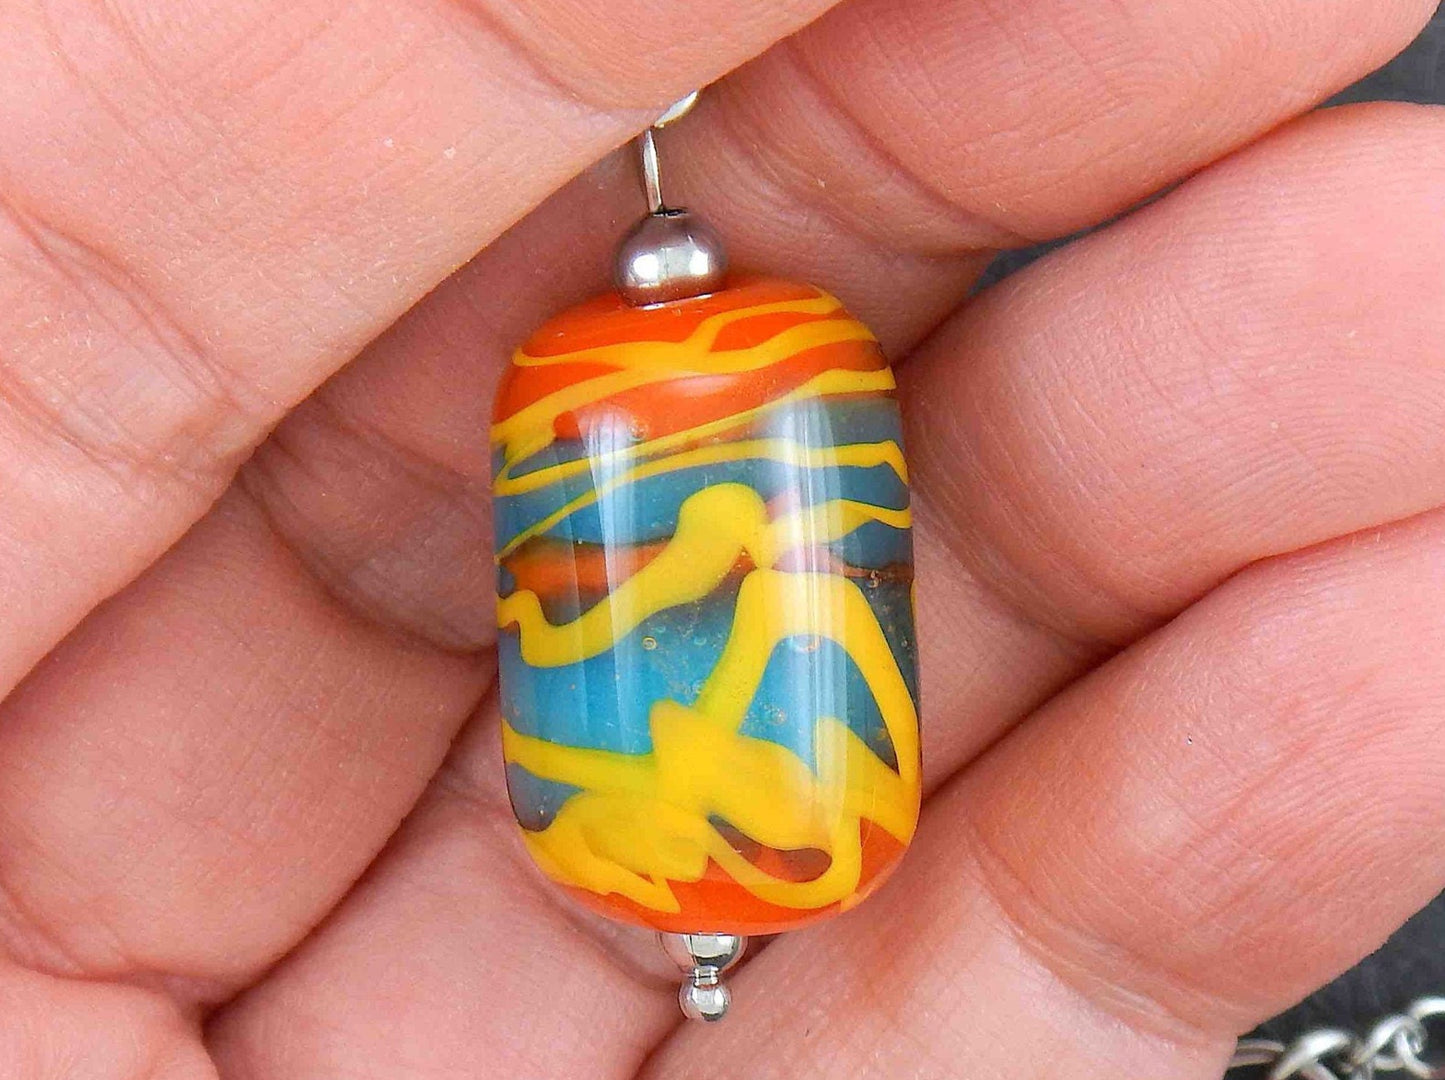 14-inch necklace with burnt orange glass cylinder marbled in turquoise & yellow (Murano-style glass handmade in Montreal), stainless steel chain